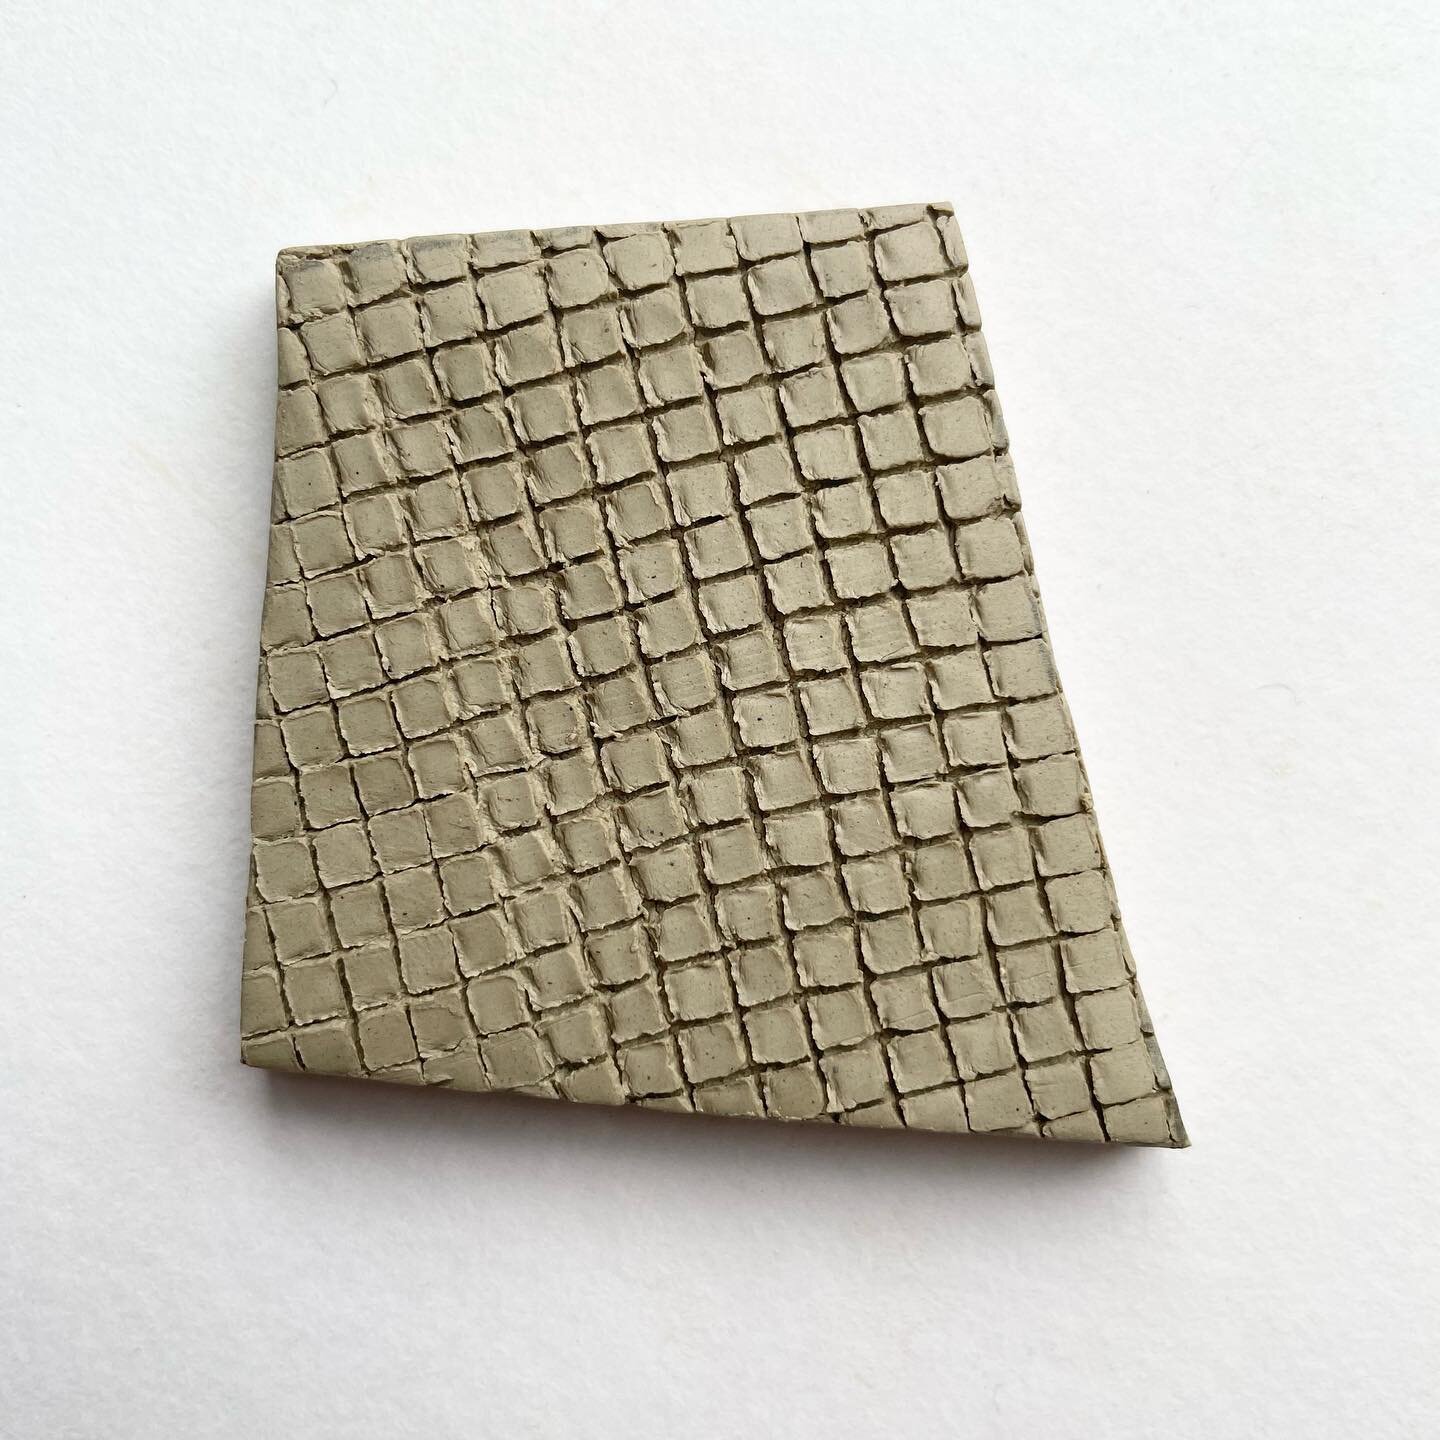 Metal mesh / wide 

@dothe100dayproject

#the100dayproject #the100dayproject2023 #the100daychallenge 
#100daysoftexturedtiles
#100daysofrandomshapes #100tiles #surfacetexture #texturedtiles #nakedclay #challengeyourself #design #ideas #experimenting 